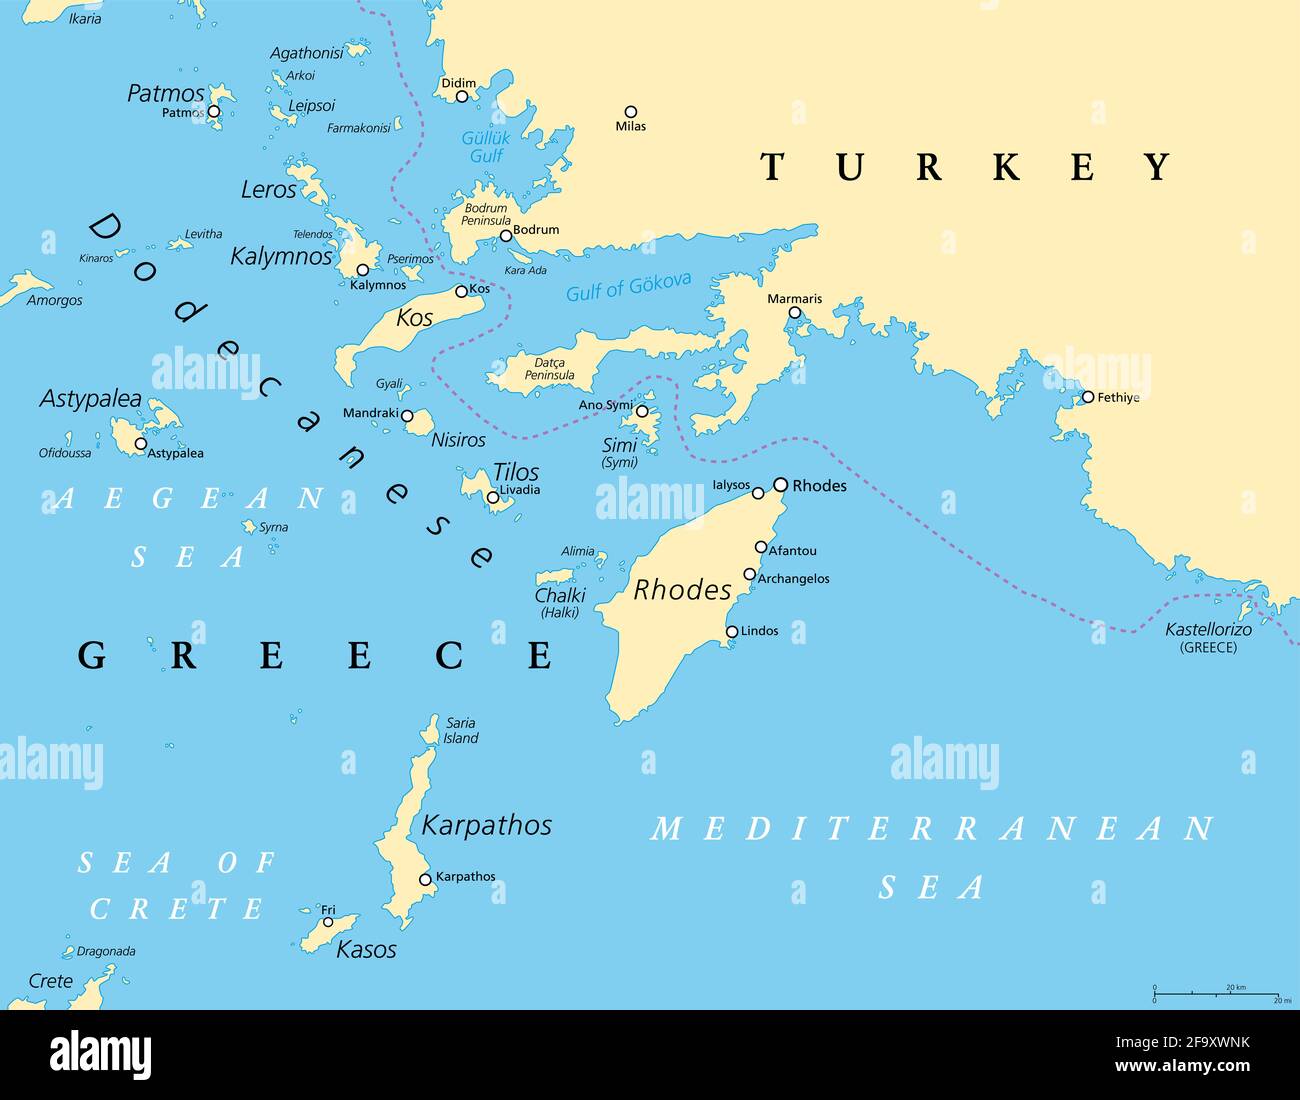 Dodecanese, political map. Group of Greek islands in the southeastern Aegean Sea and Eastern Mediterranean, off the coast of Turkey. Stock Photo